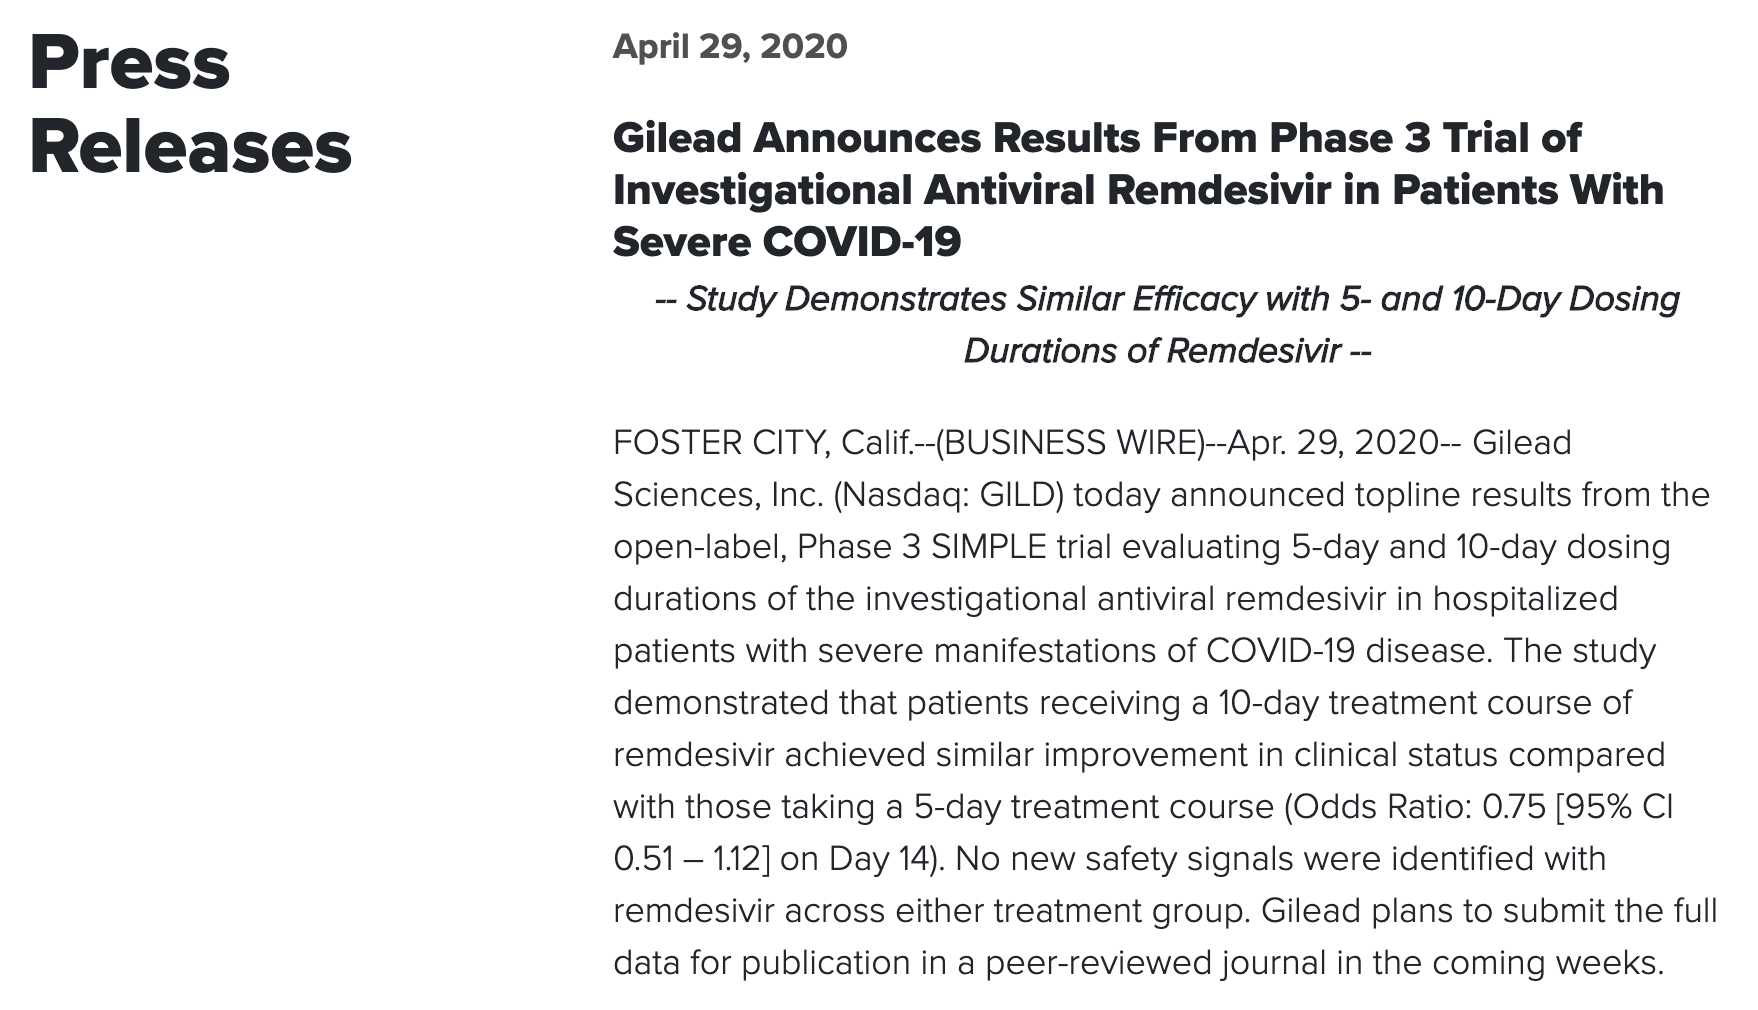 Gilead press release (no peer reviewed publication yet), https://www.gilead.com/news-and-press/press-room/press-releases/2020/4/gilead-announces-results-from-phase-3-trial-of-investigational-antiviral-remdesivir-in-patients-with-severe-covid-19https://www.thelancet.com/journals/lancet/article/PIIS0140-6736(20)31022-9/fulltext